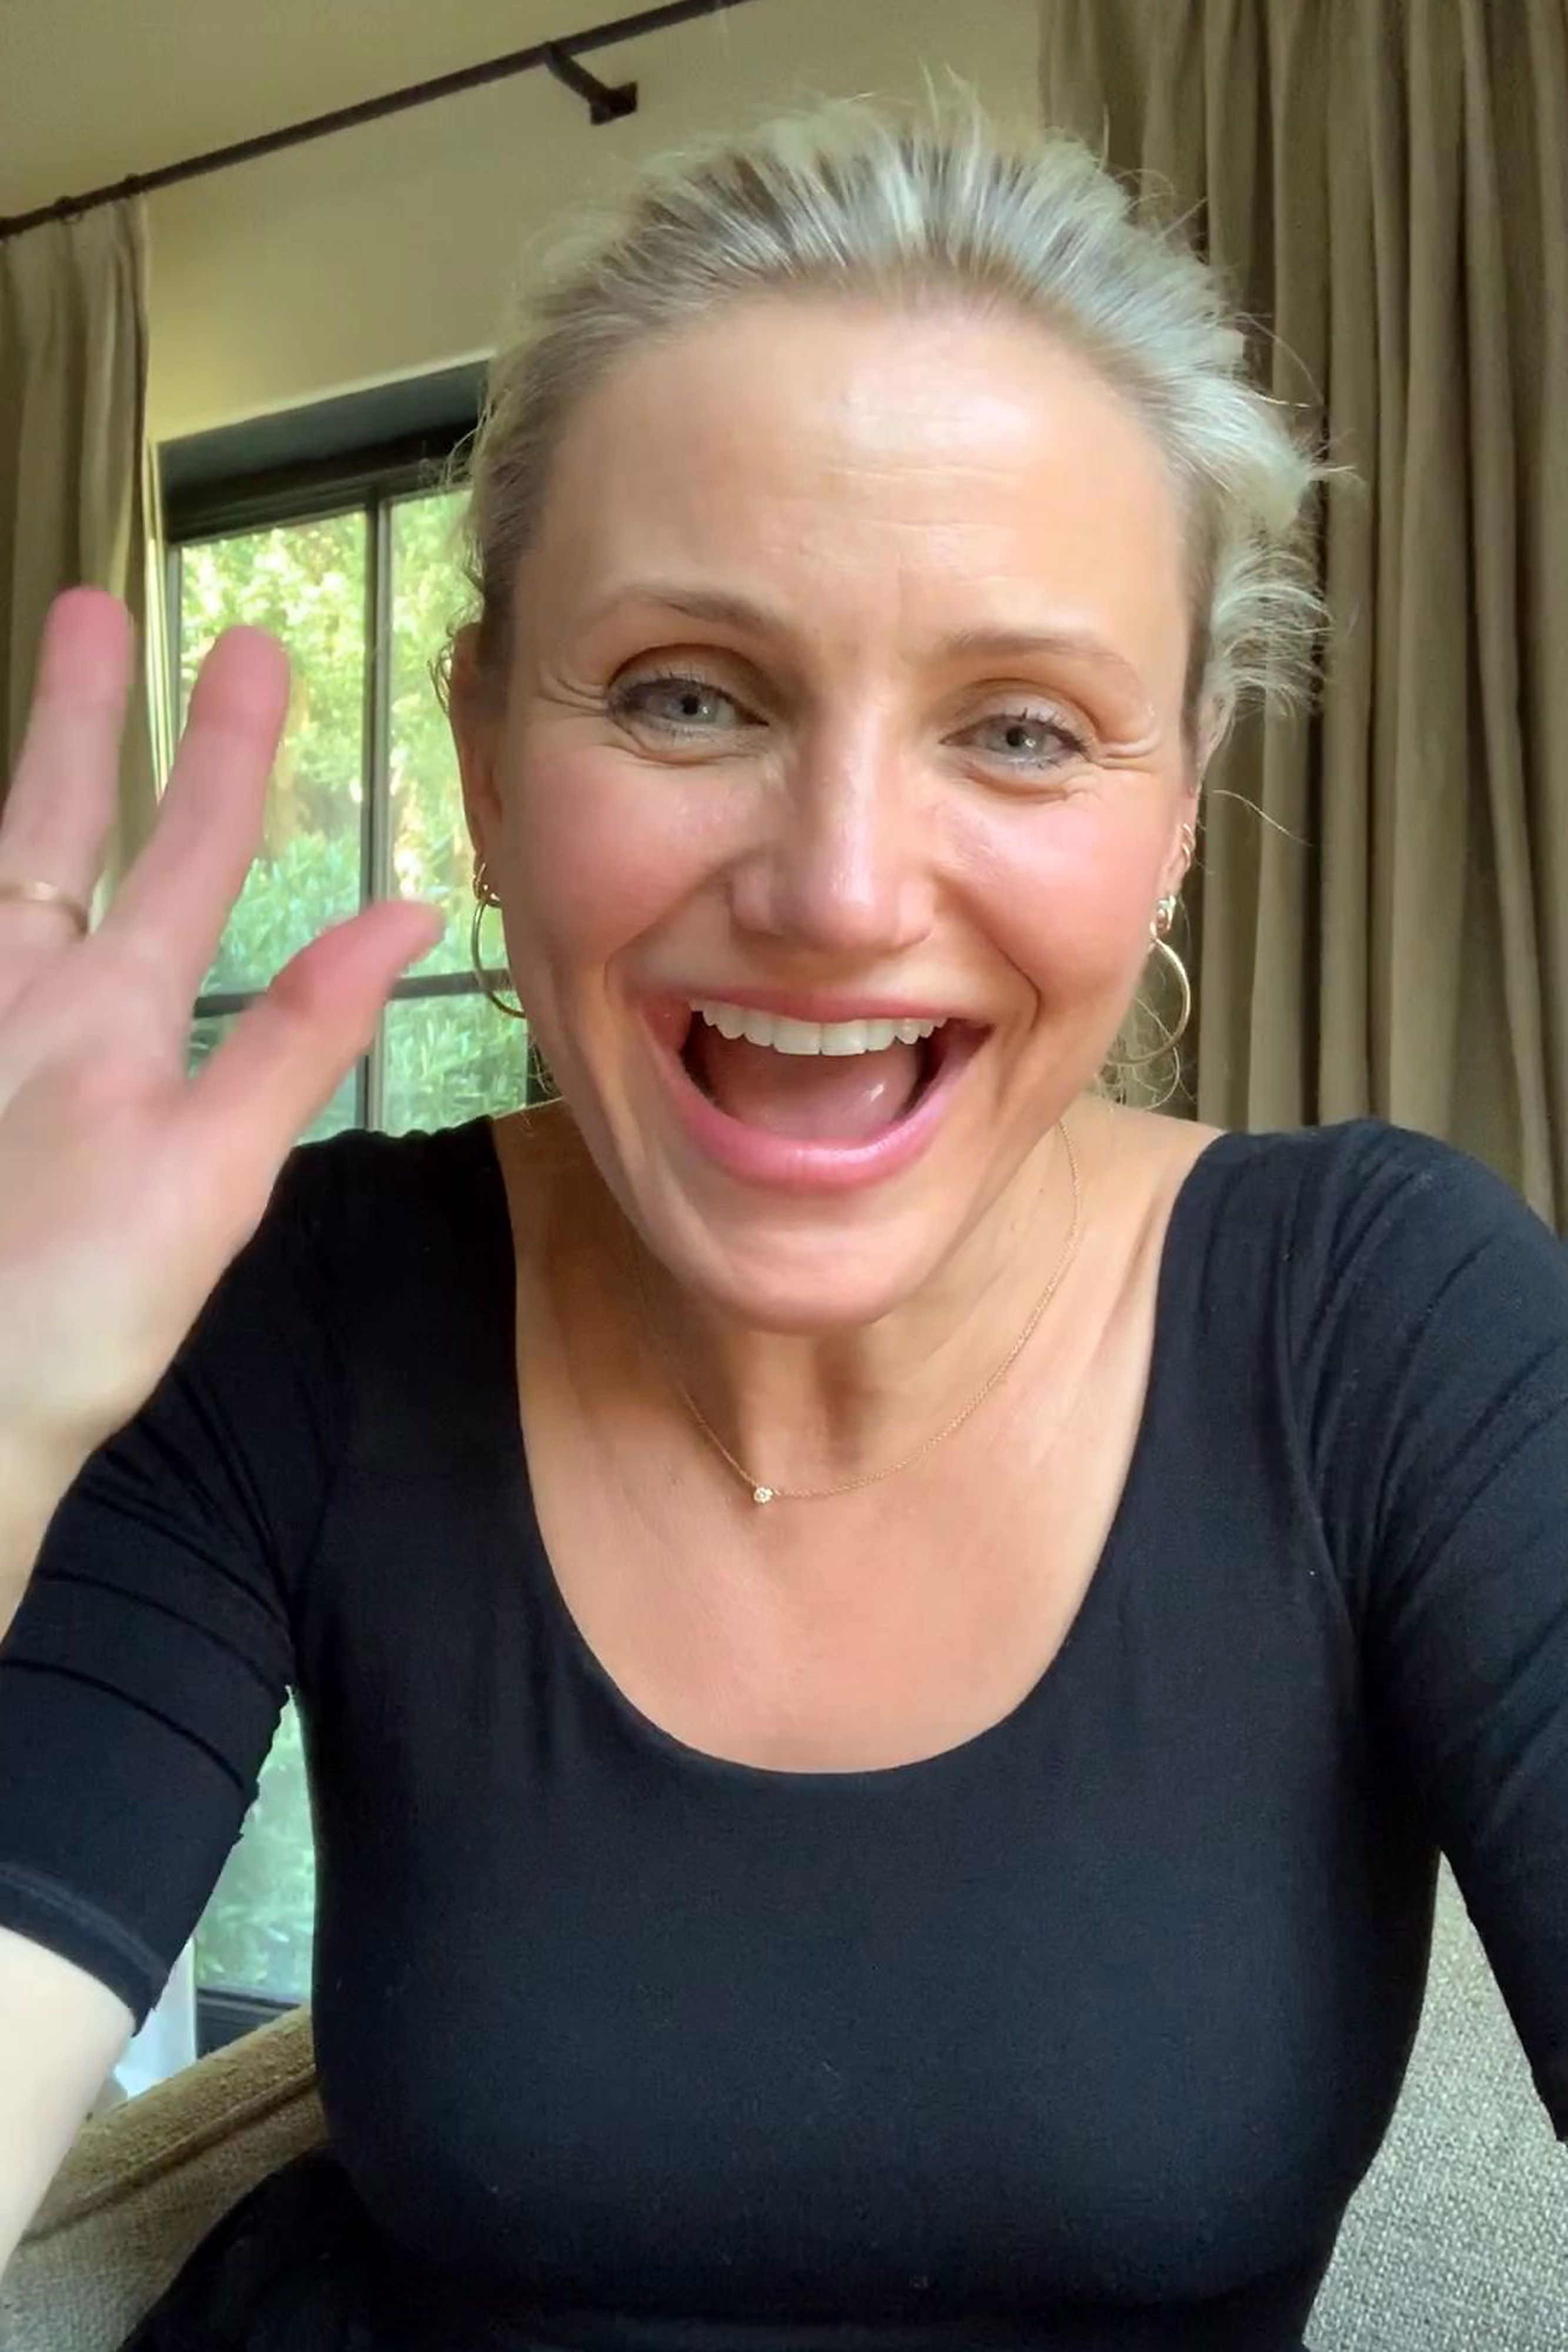 Cameron Diaz speaking during "RuPaul's Digital DragCon" on May 3, 2020 | Source: Getty Images